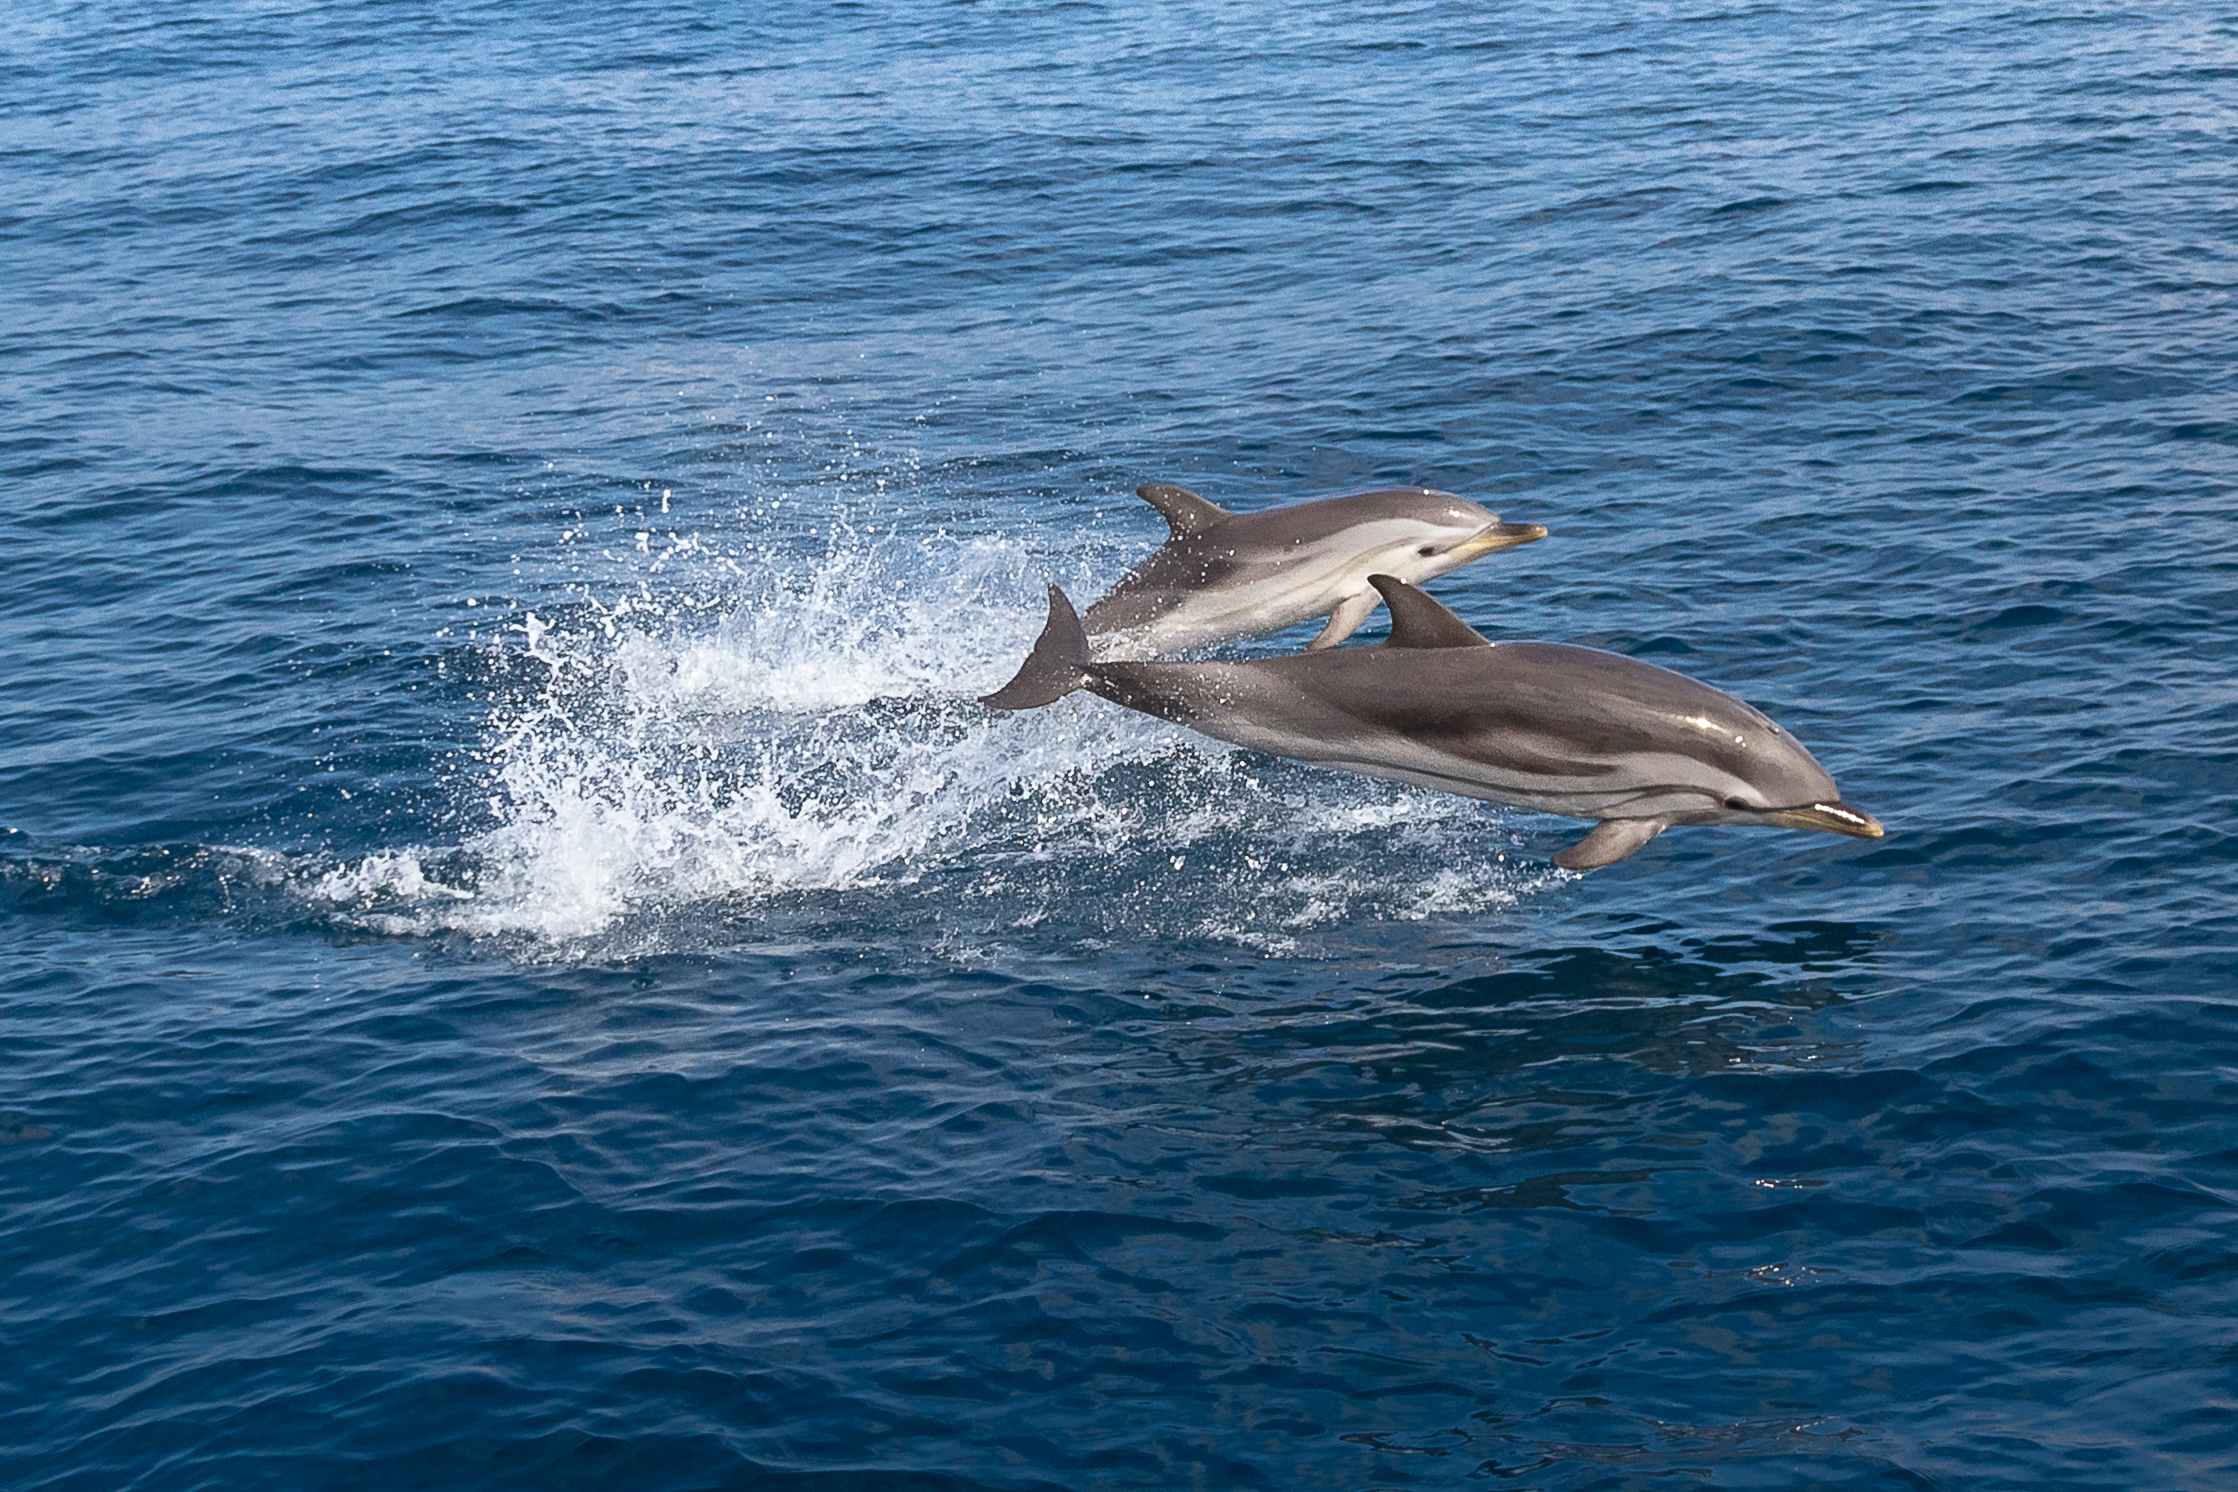 Navies around the world use dolphins in missions (Getty Images)